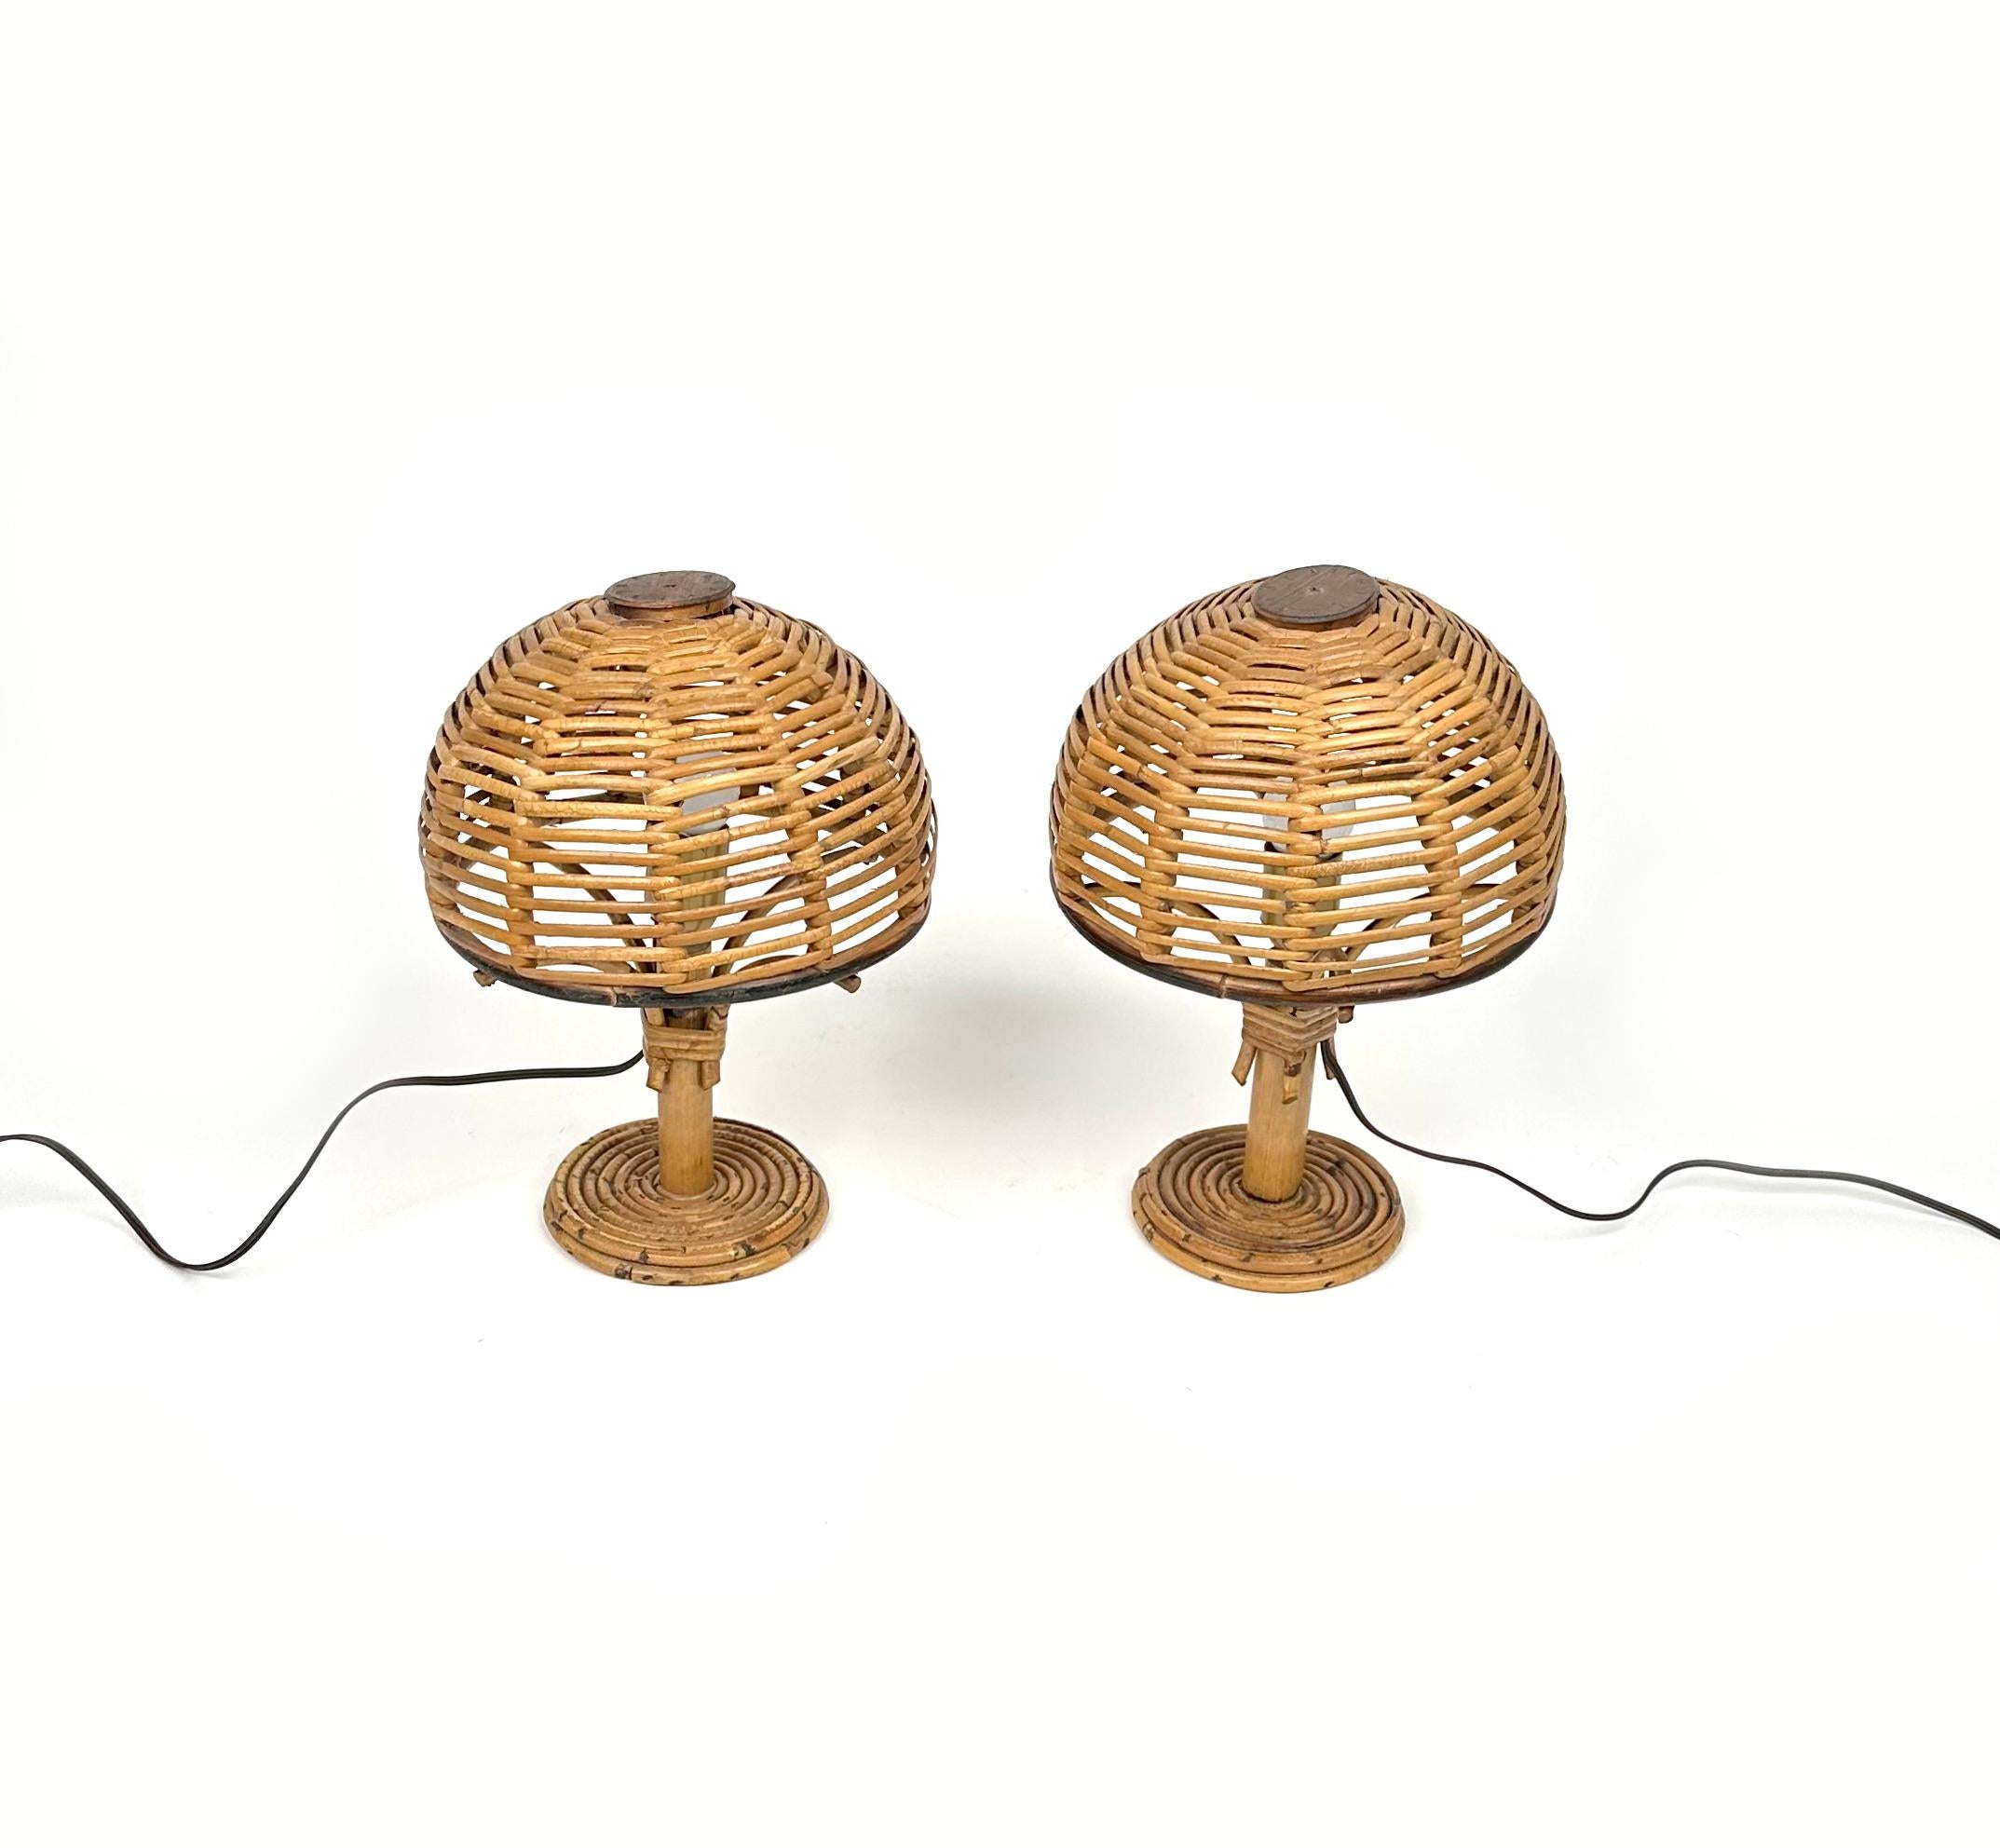 Midcentury Bamboo and Rattan Pair of Table Lamps Louis Sognot Style, Italy 1960s In Good Condition For Sale In Rome, IT